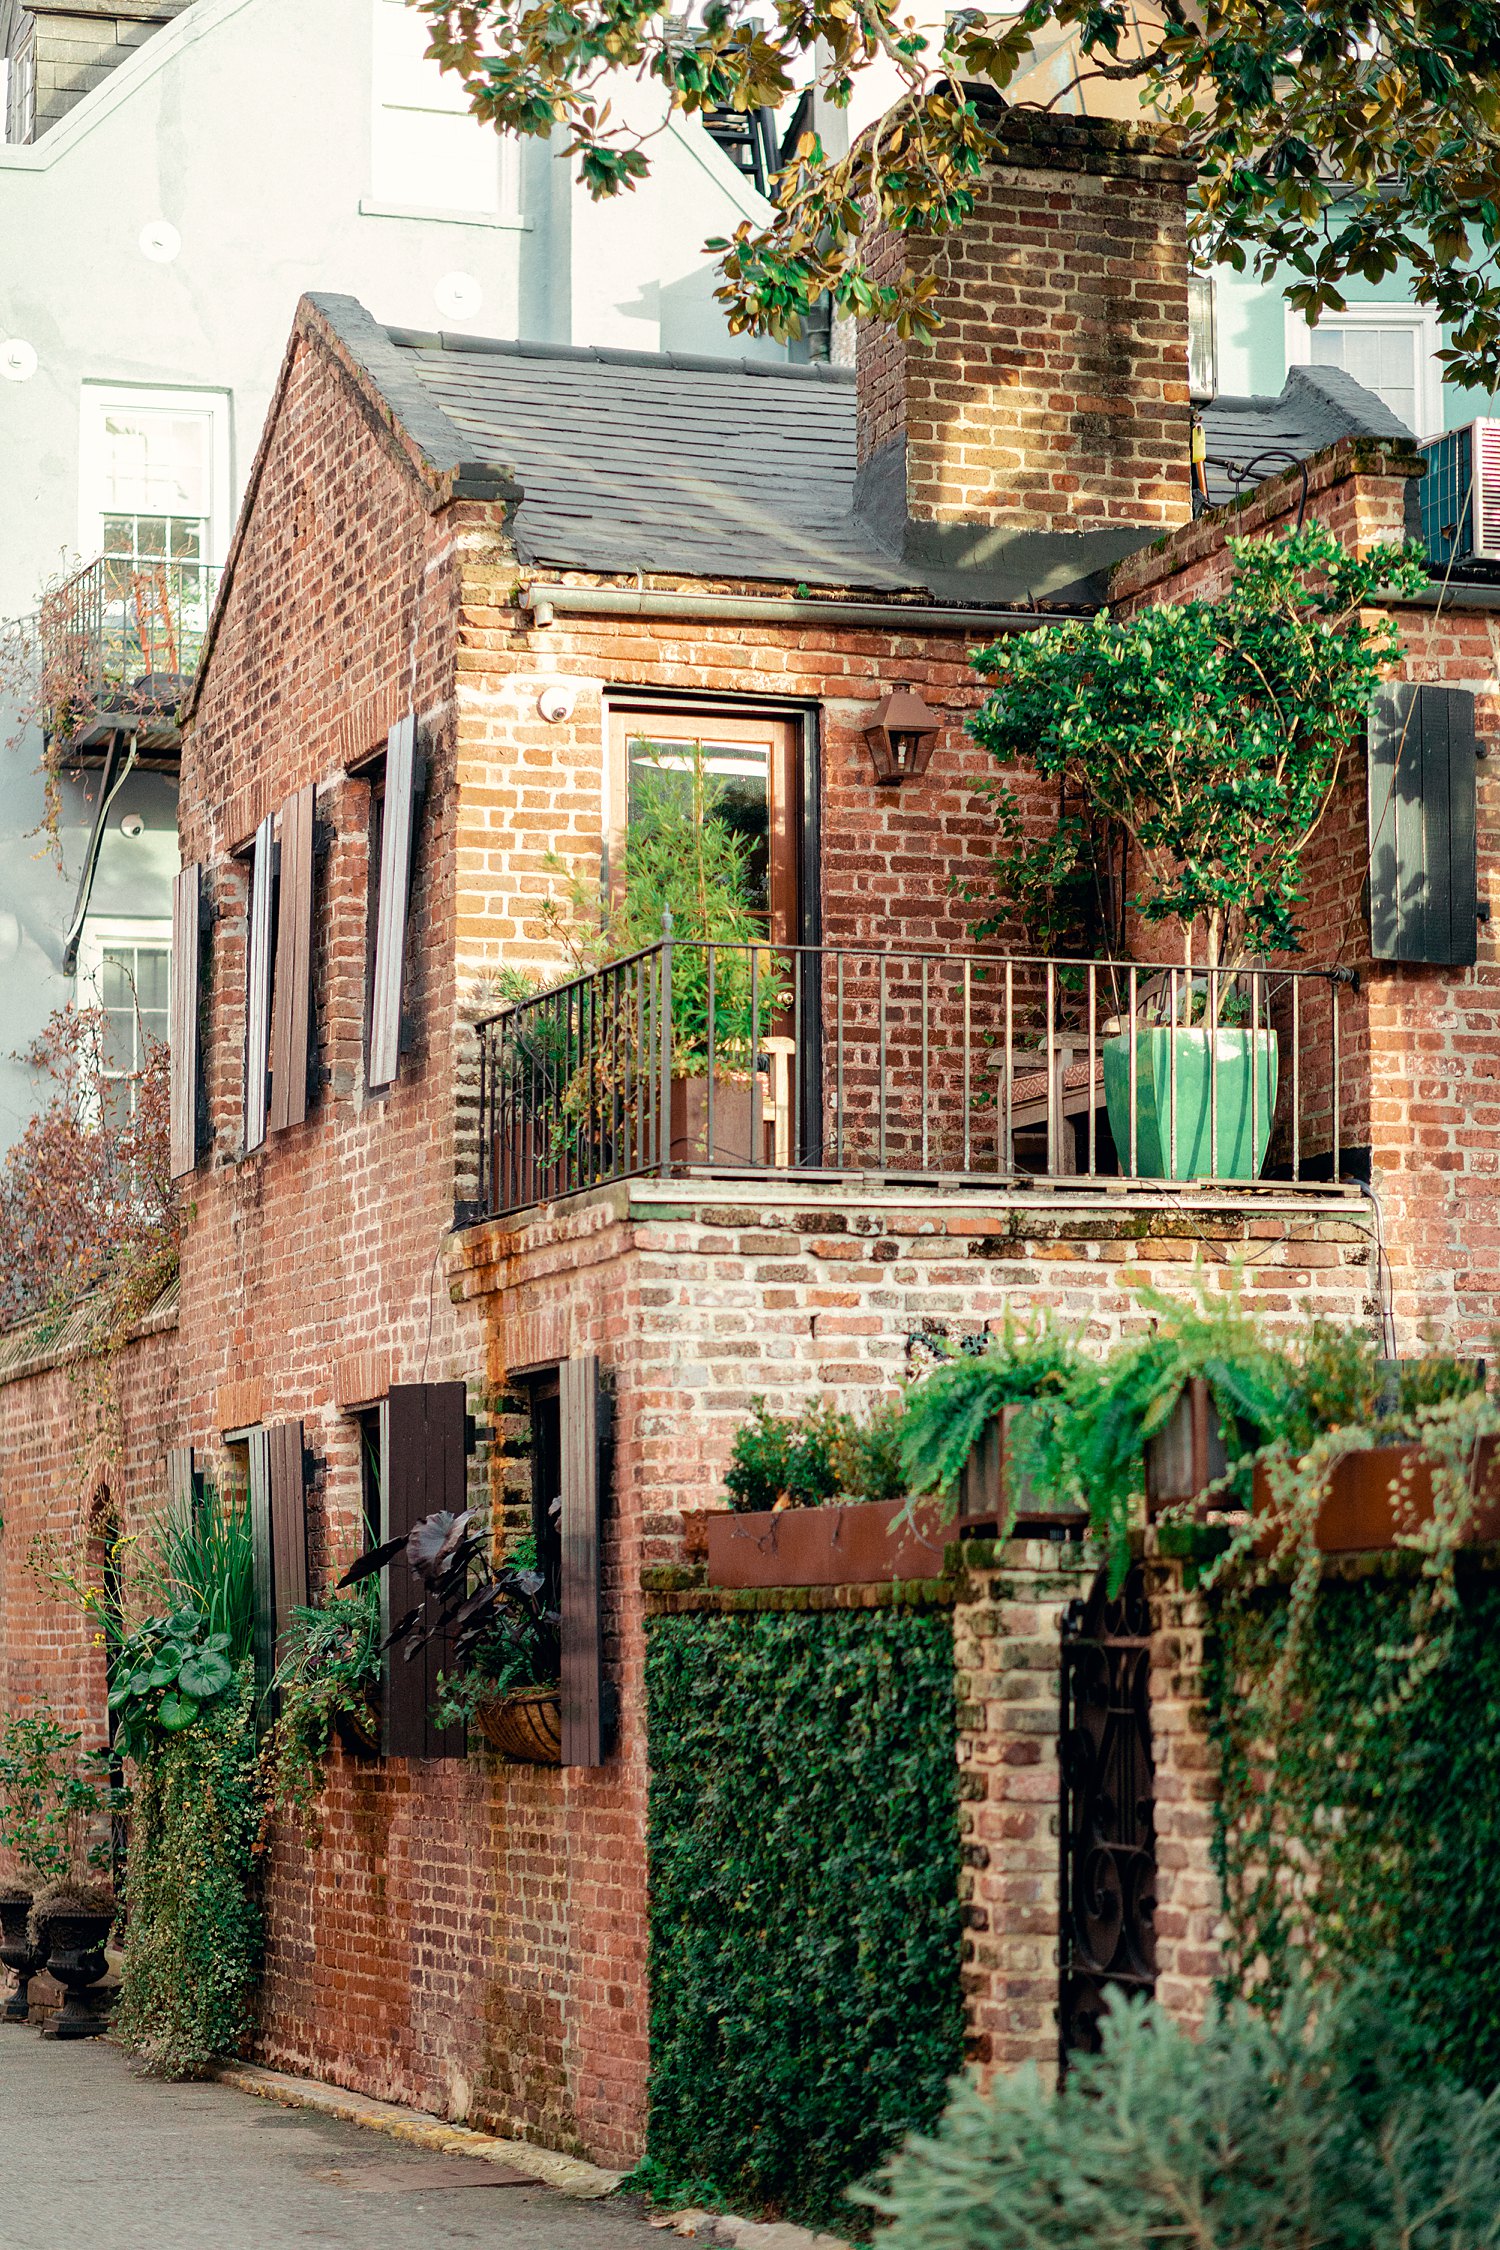 Red brick two story building surrounded by green plants in Charleston